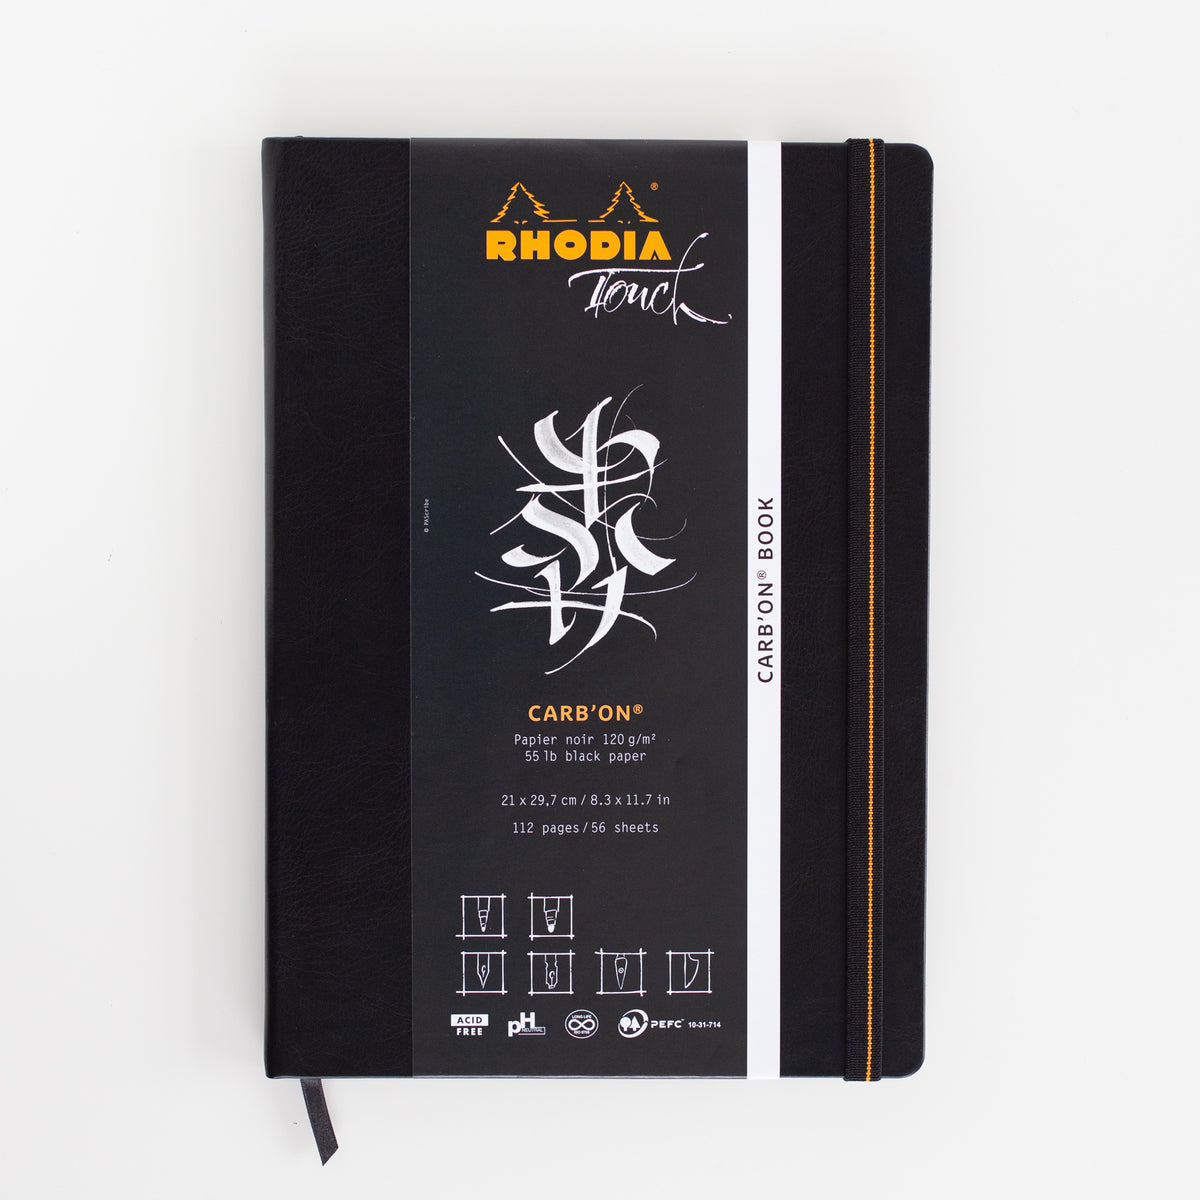 Rhodia Carb'on Book A4 120gms